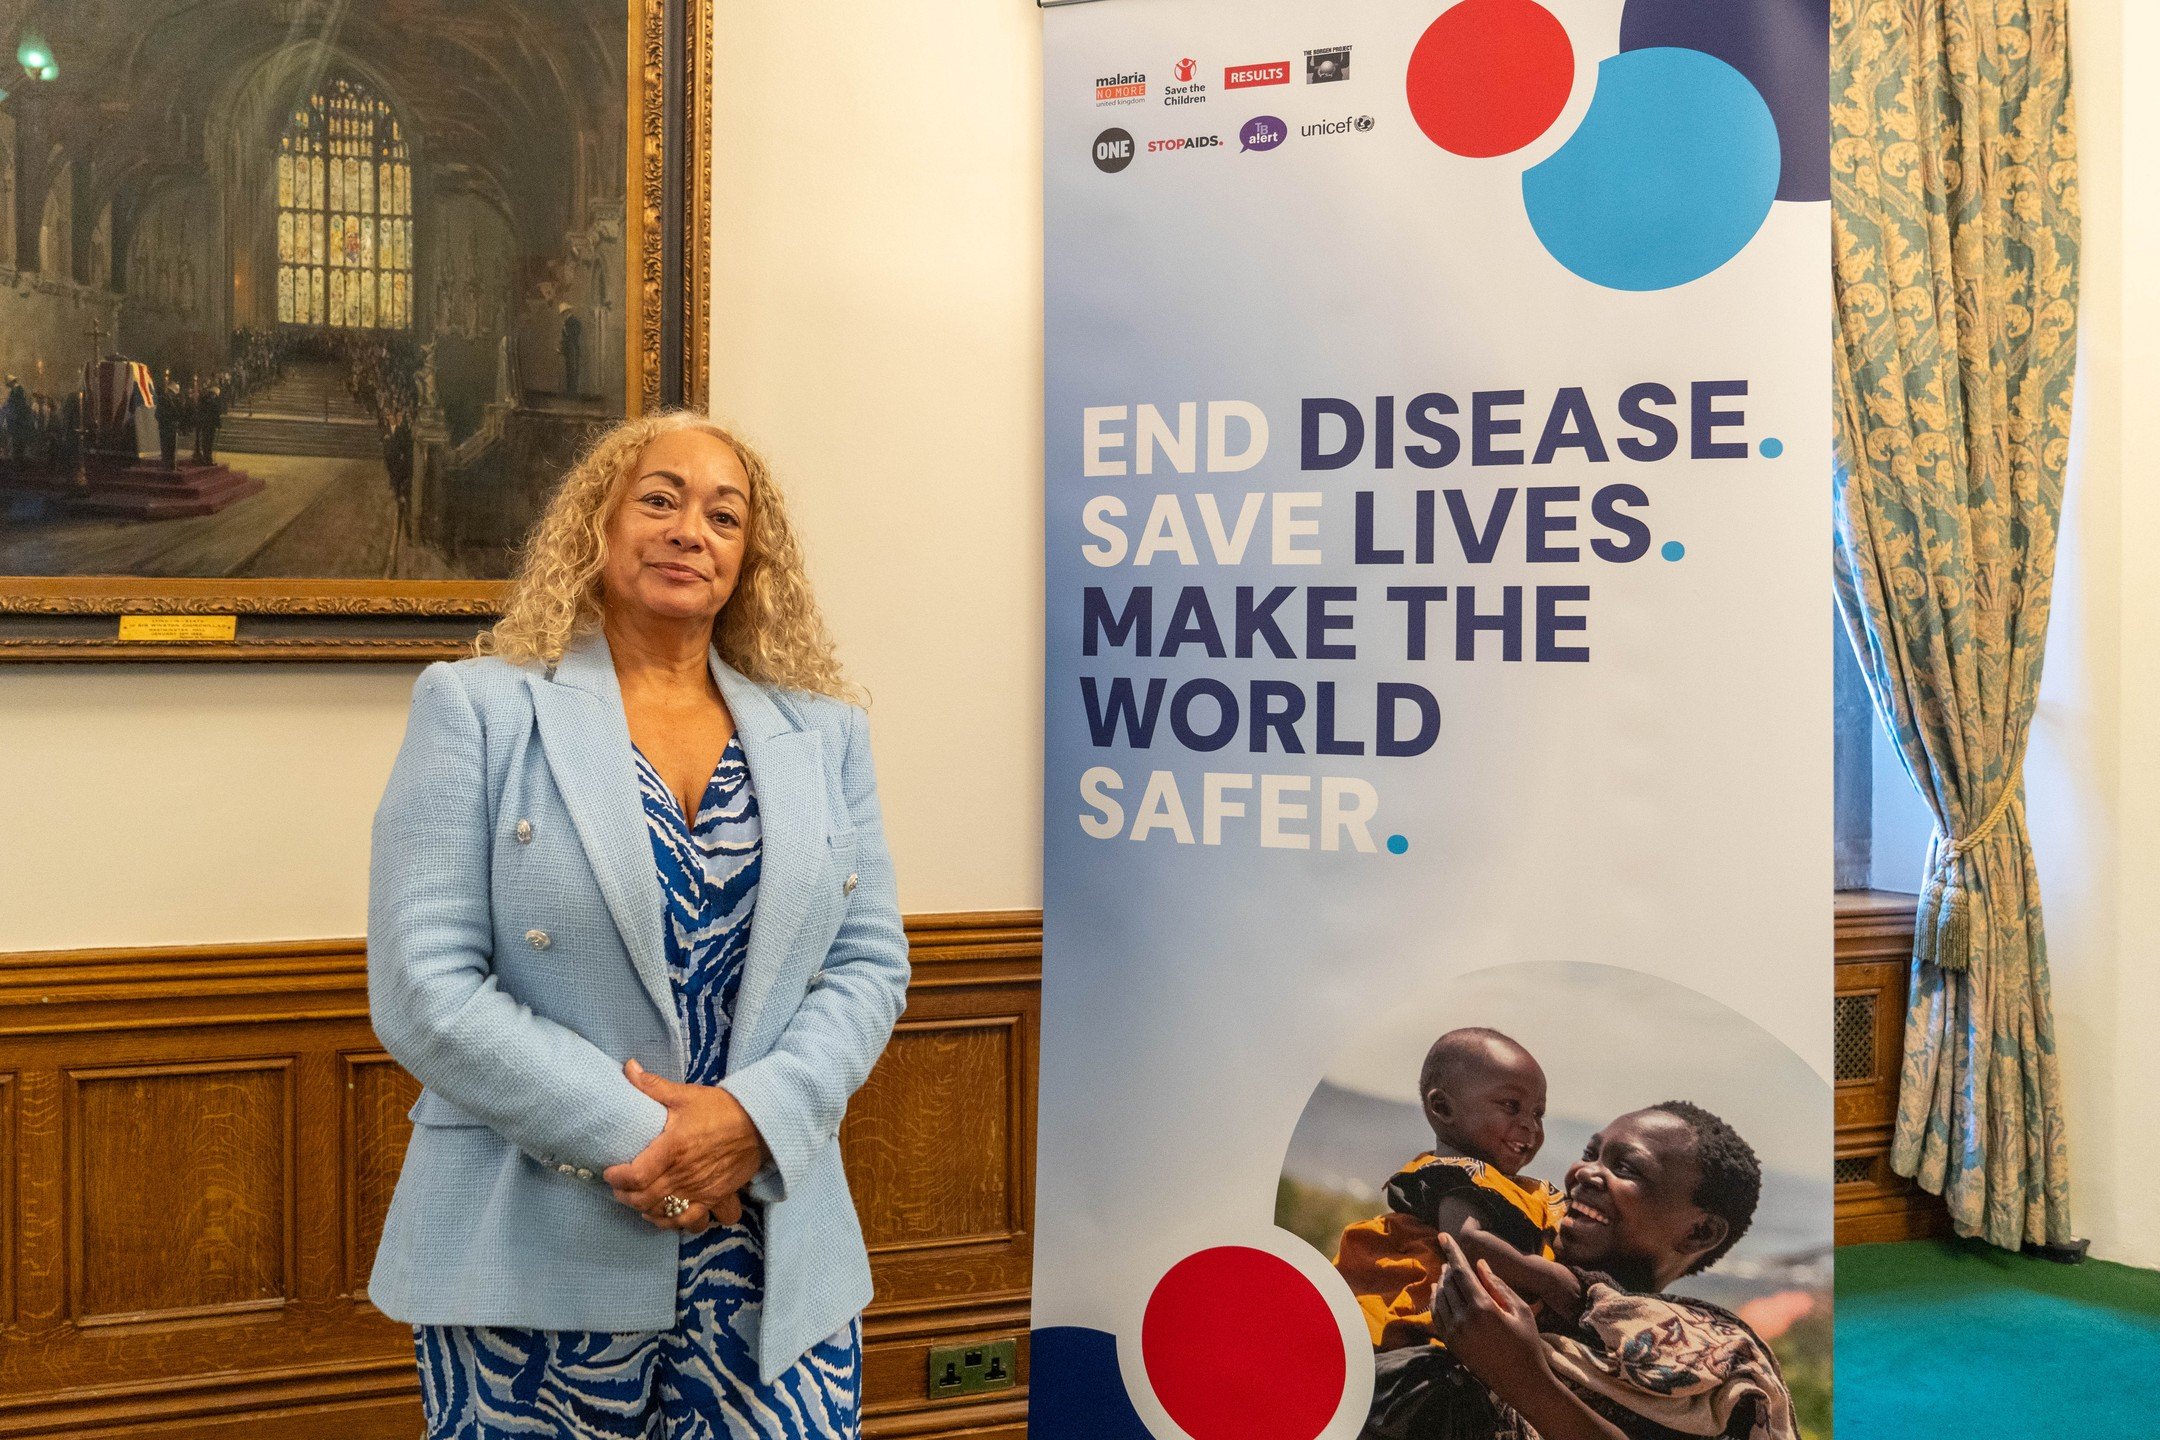 It was great to attend the Future of Vaccines event last Tuesday. By supporting the @globalfund, we can ensure the tools and vaccines developed by British-backed science reach those who need them, saving millions of lives from some of the world&rsquo